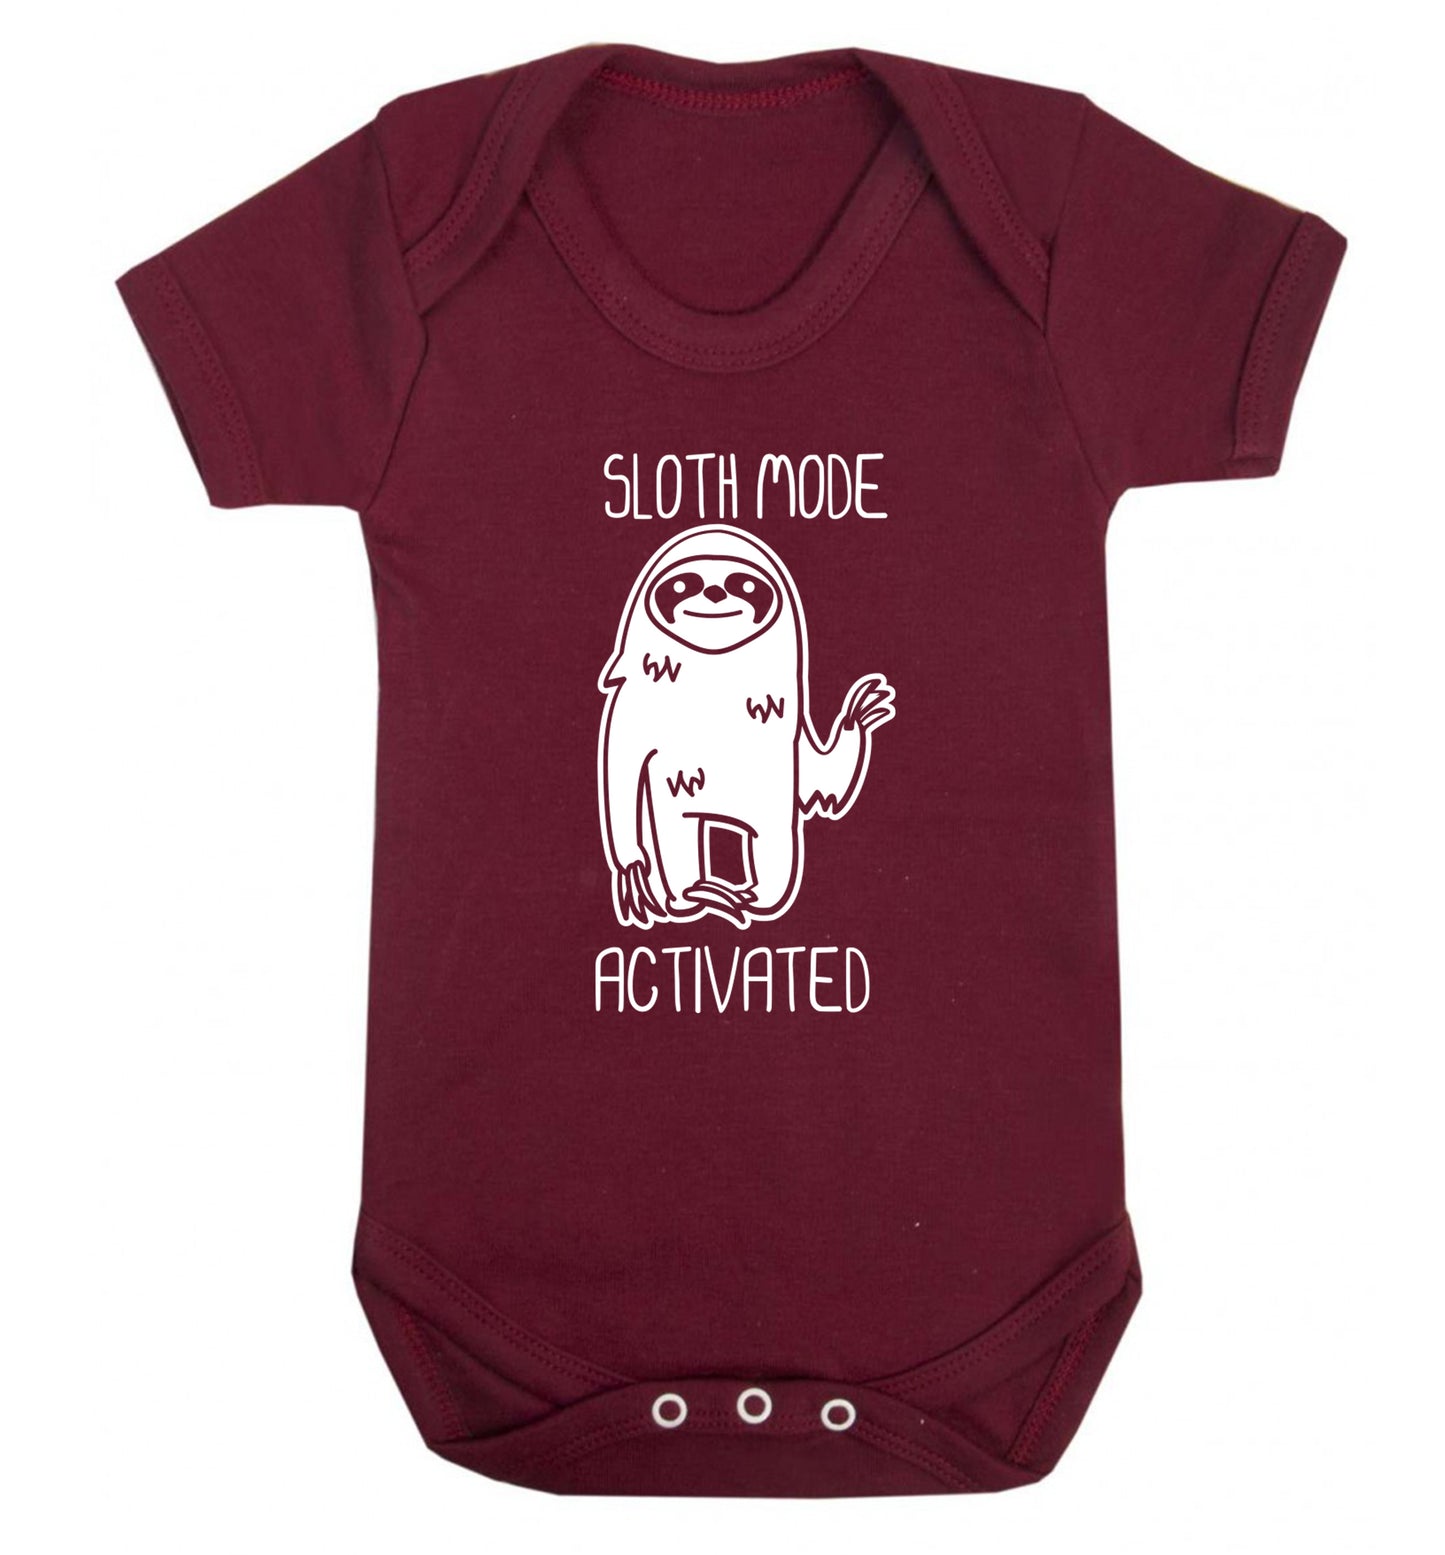 Sloth mode acitvated Baby Vest maroon 18-24 months